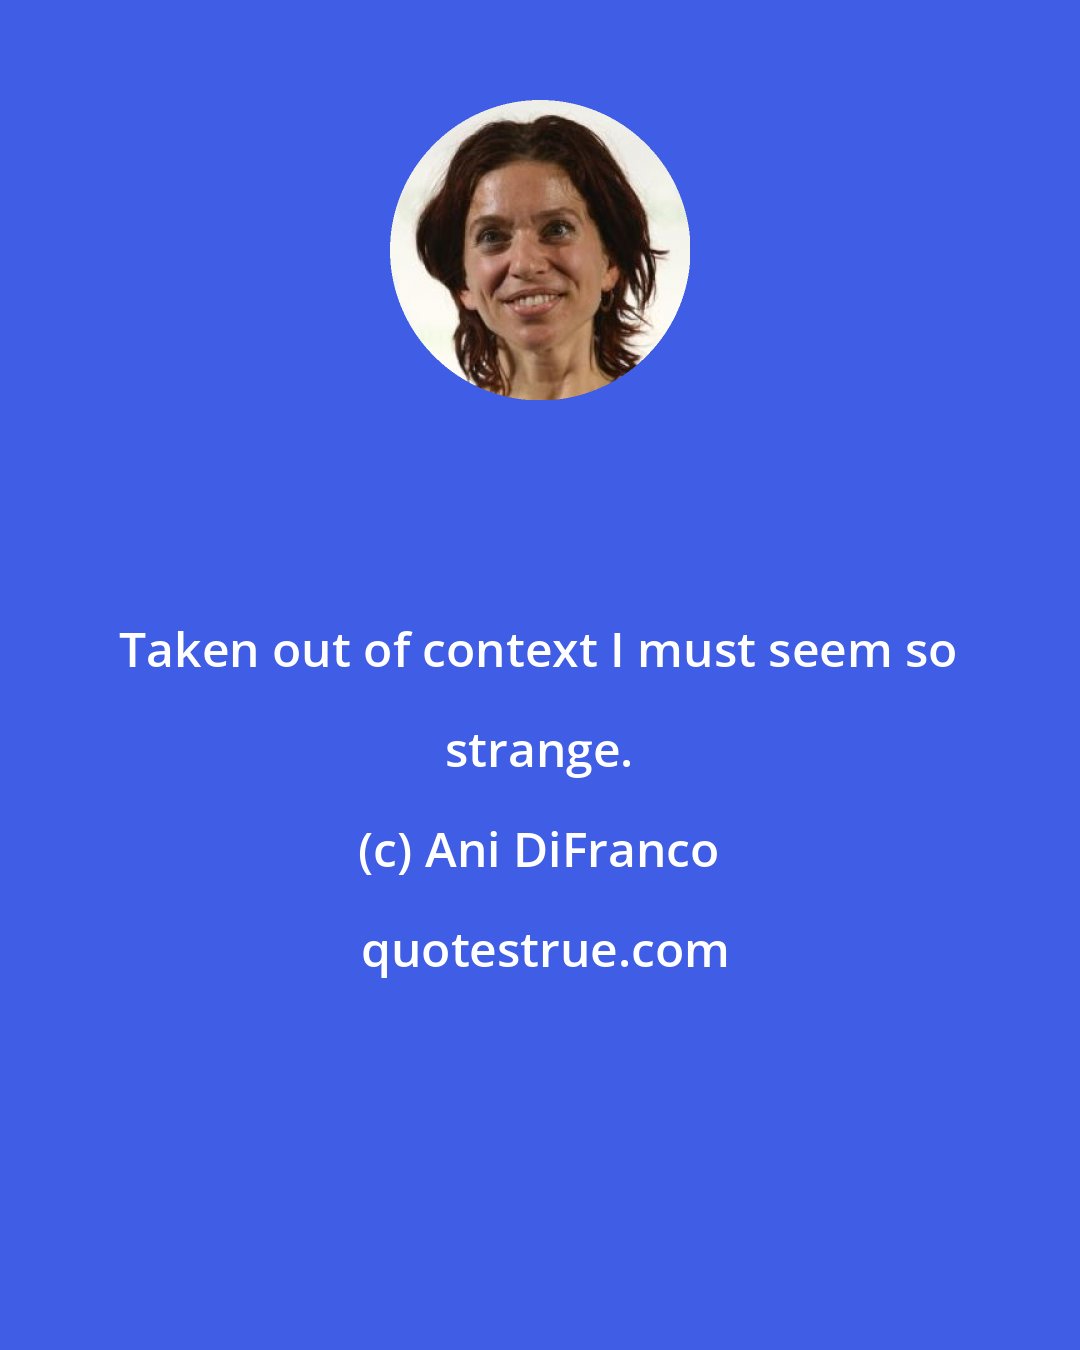 Ani DiFranco: Taken out of context I must seem so strange.